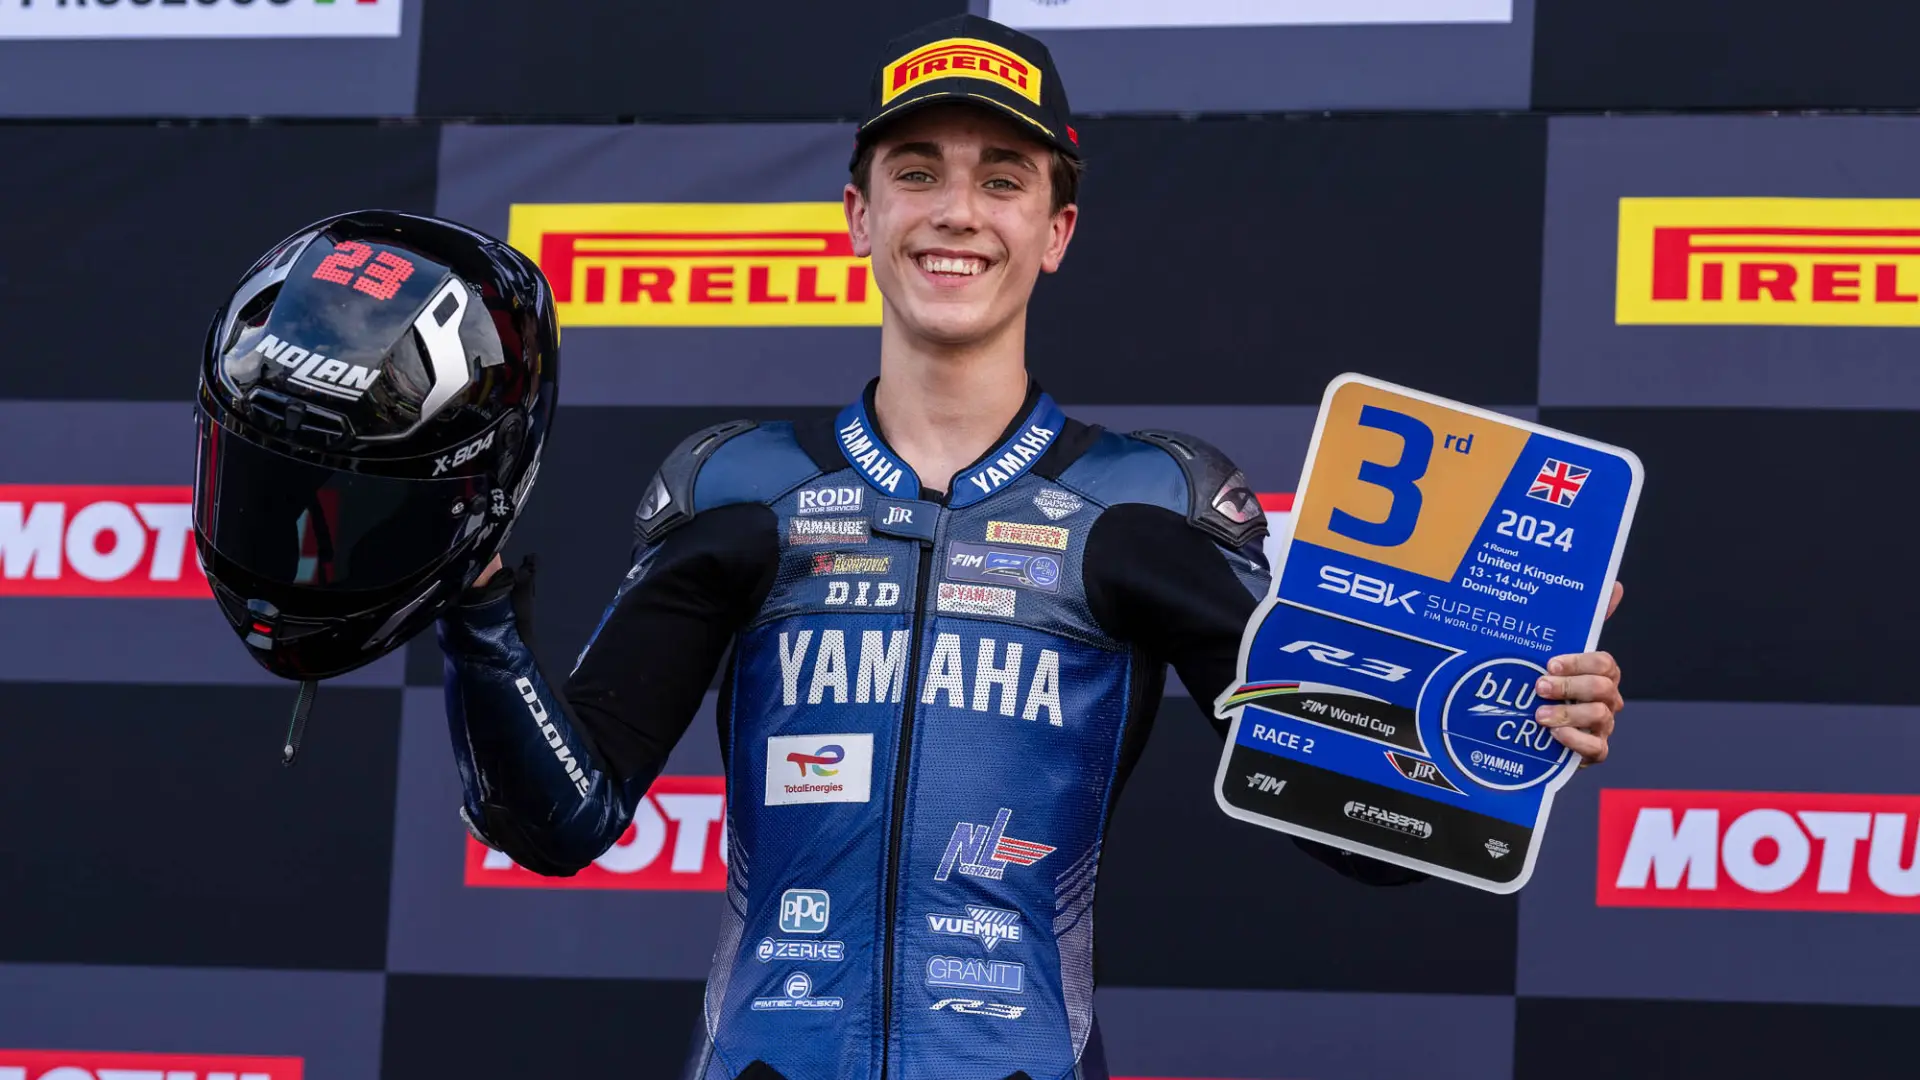 Teruel rider Gonzalo Sanchez, third in the UK, continues to lead the Yamaha Cup